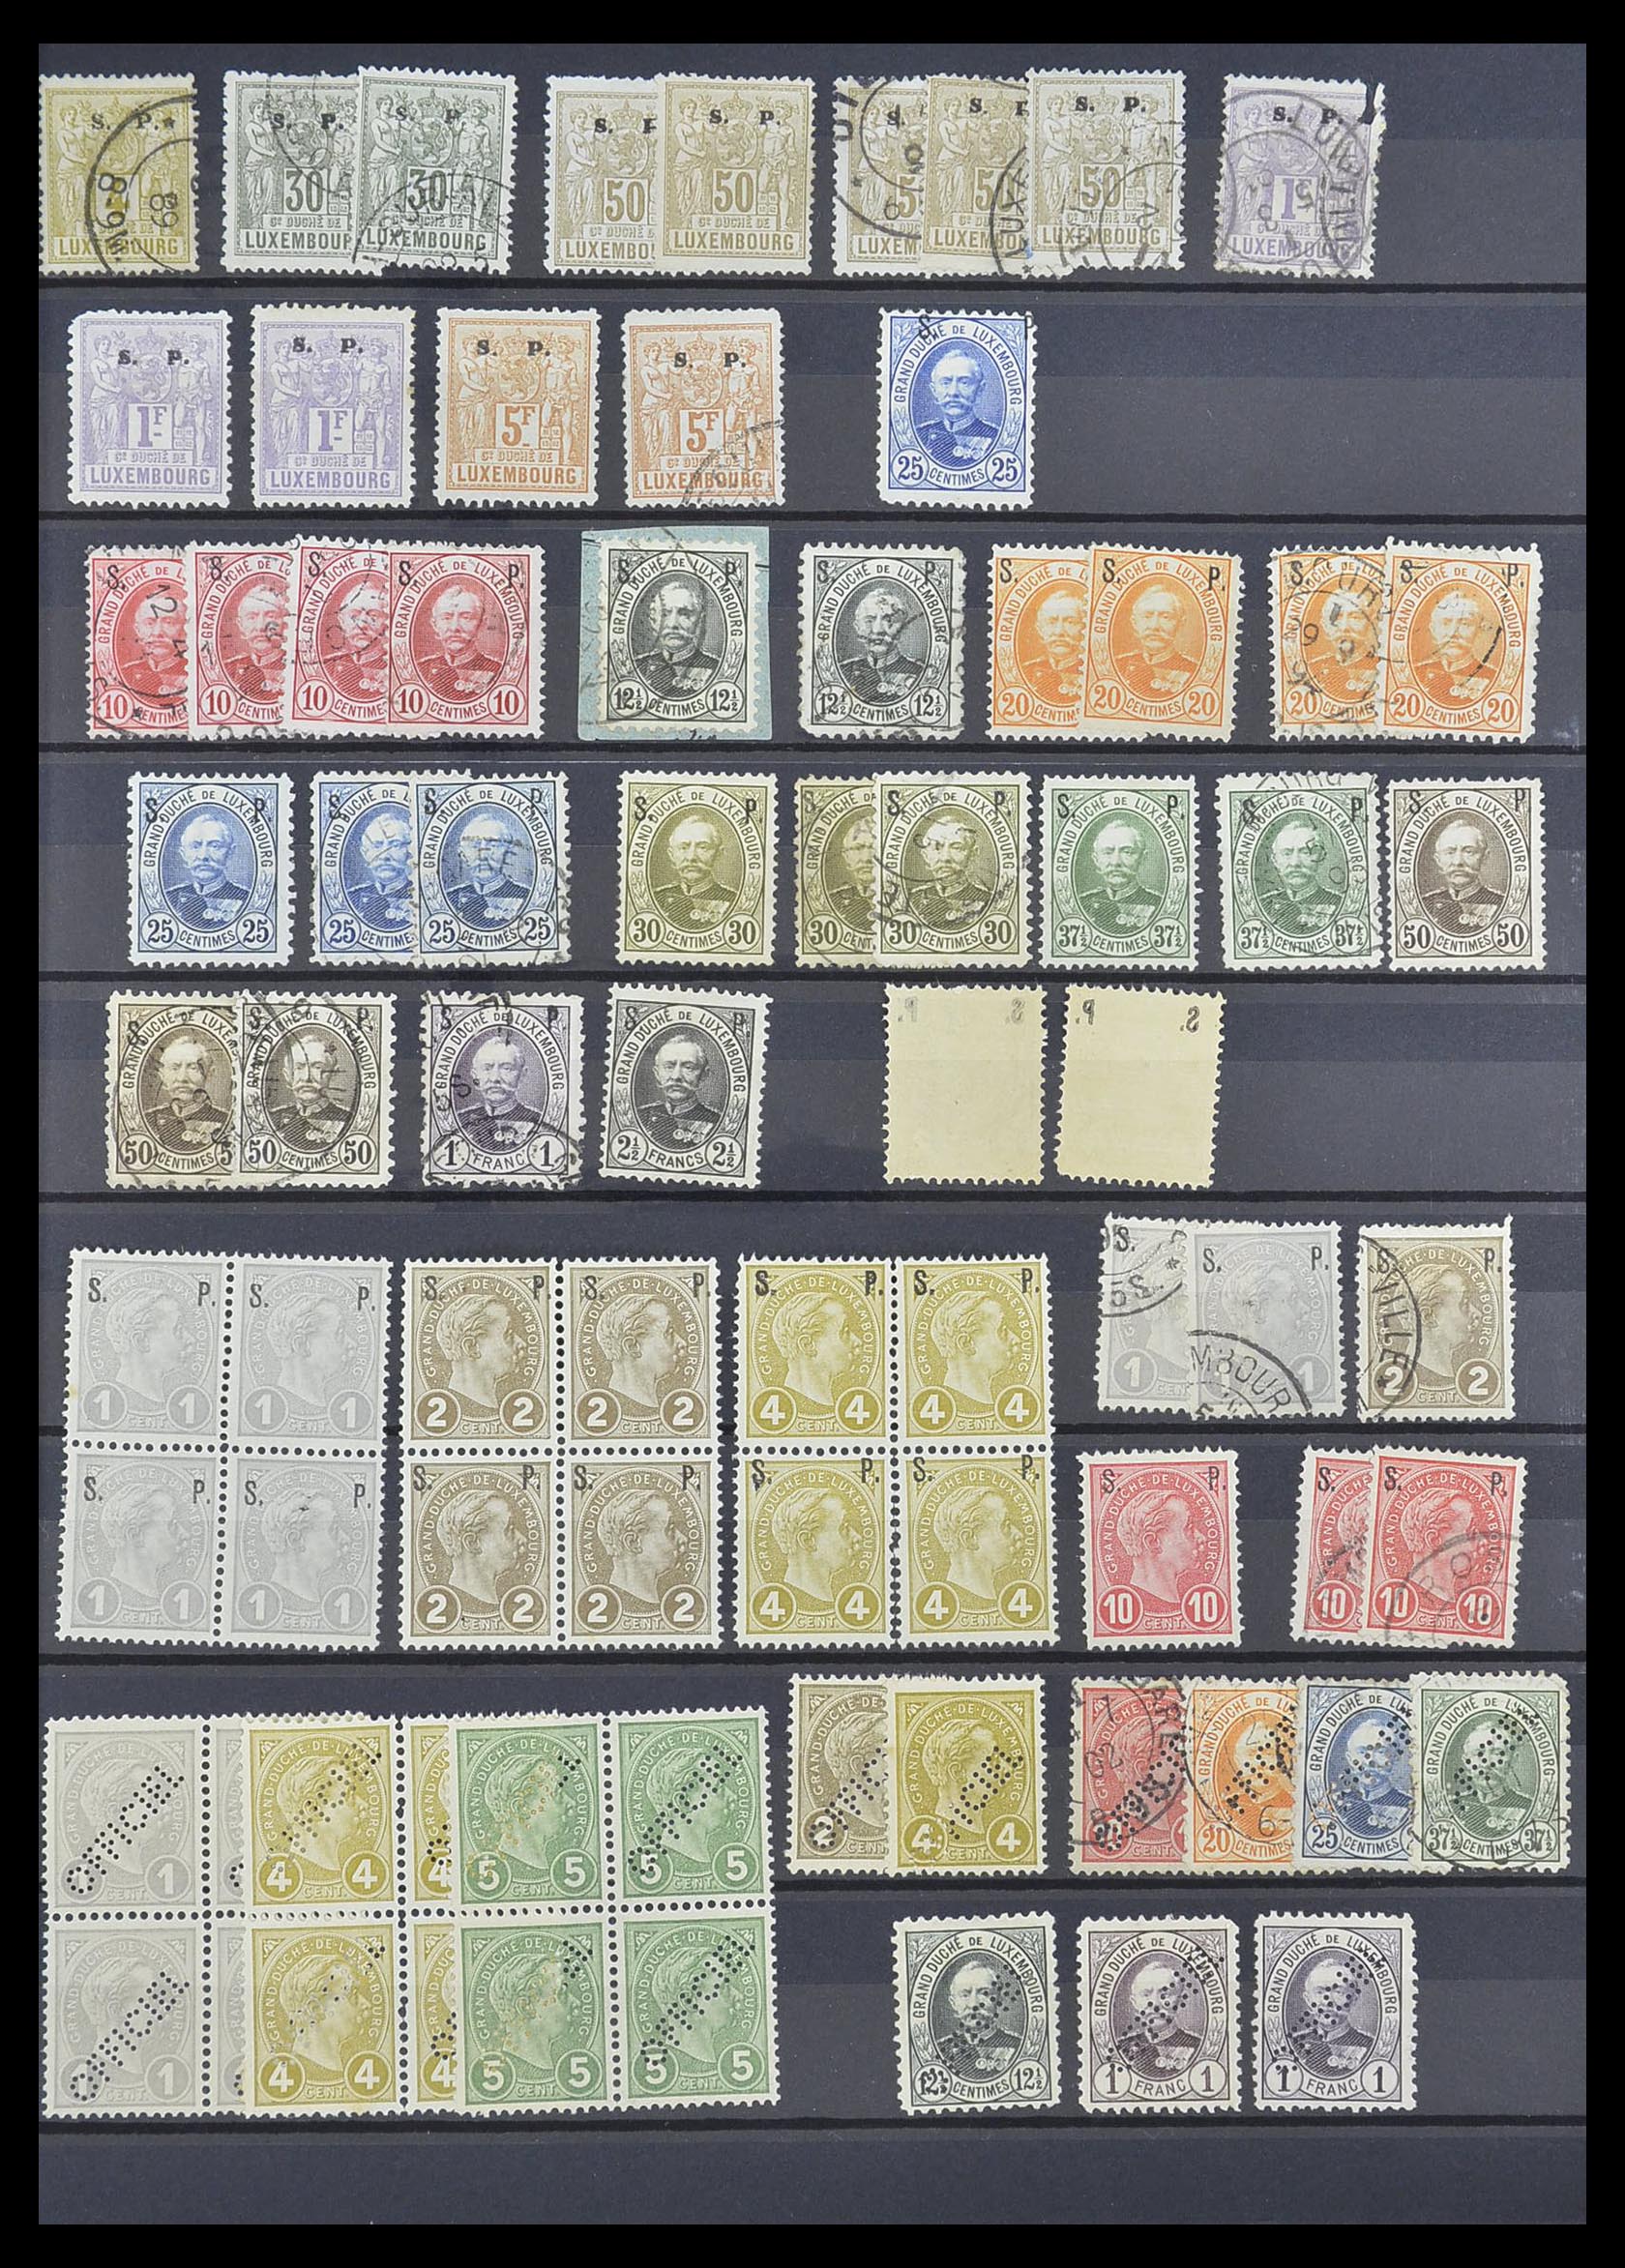 33756 021 - Stamp collection 33756 World classic 1850-1930.